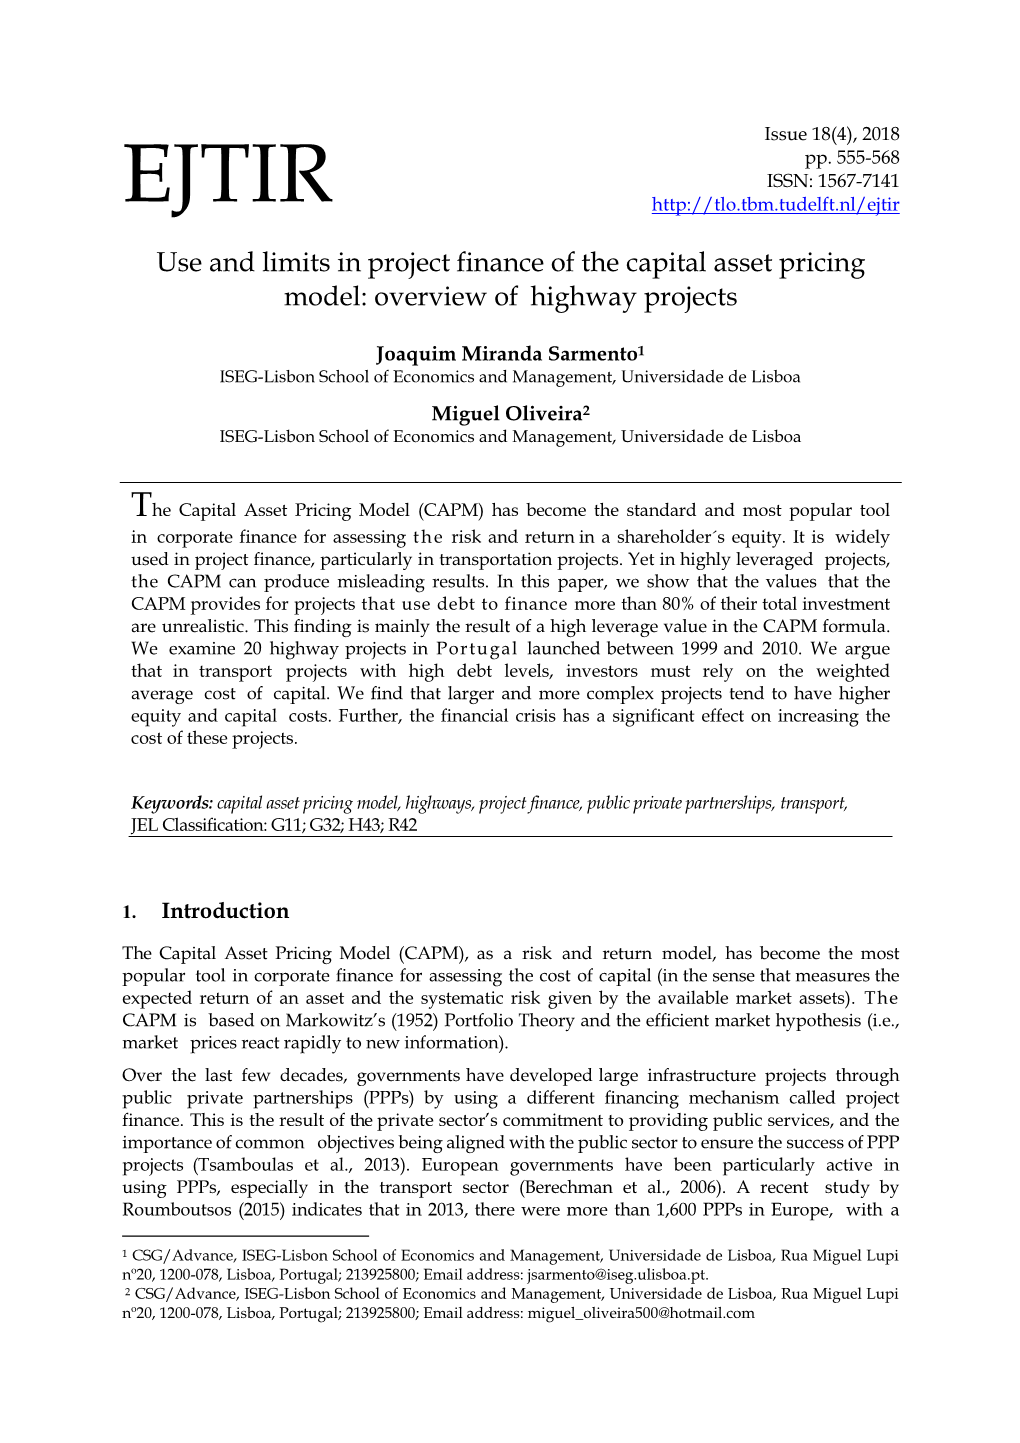 Use and Limits in Project Finance of the Capital Asset Pricing Model: Overview of Highway Projects